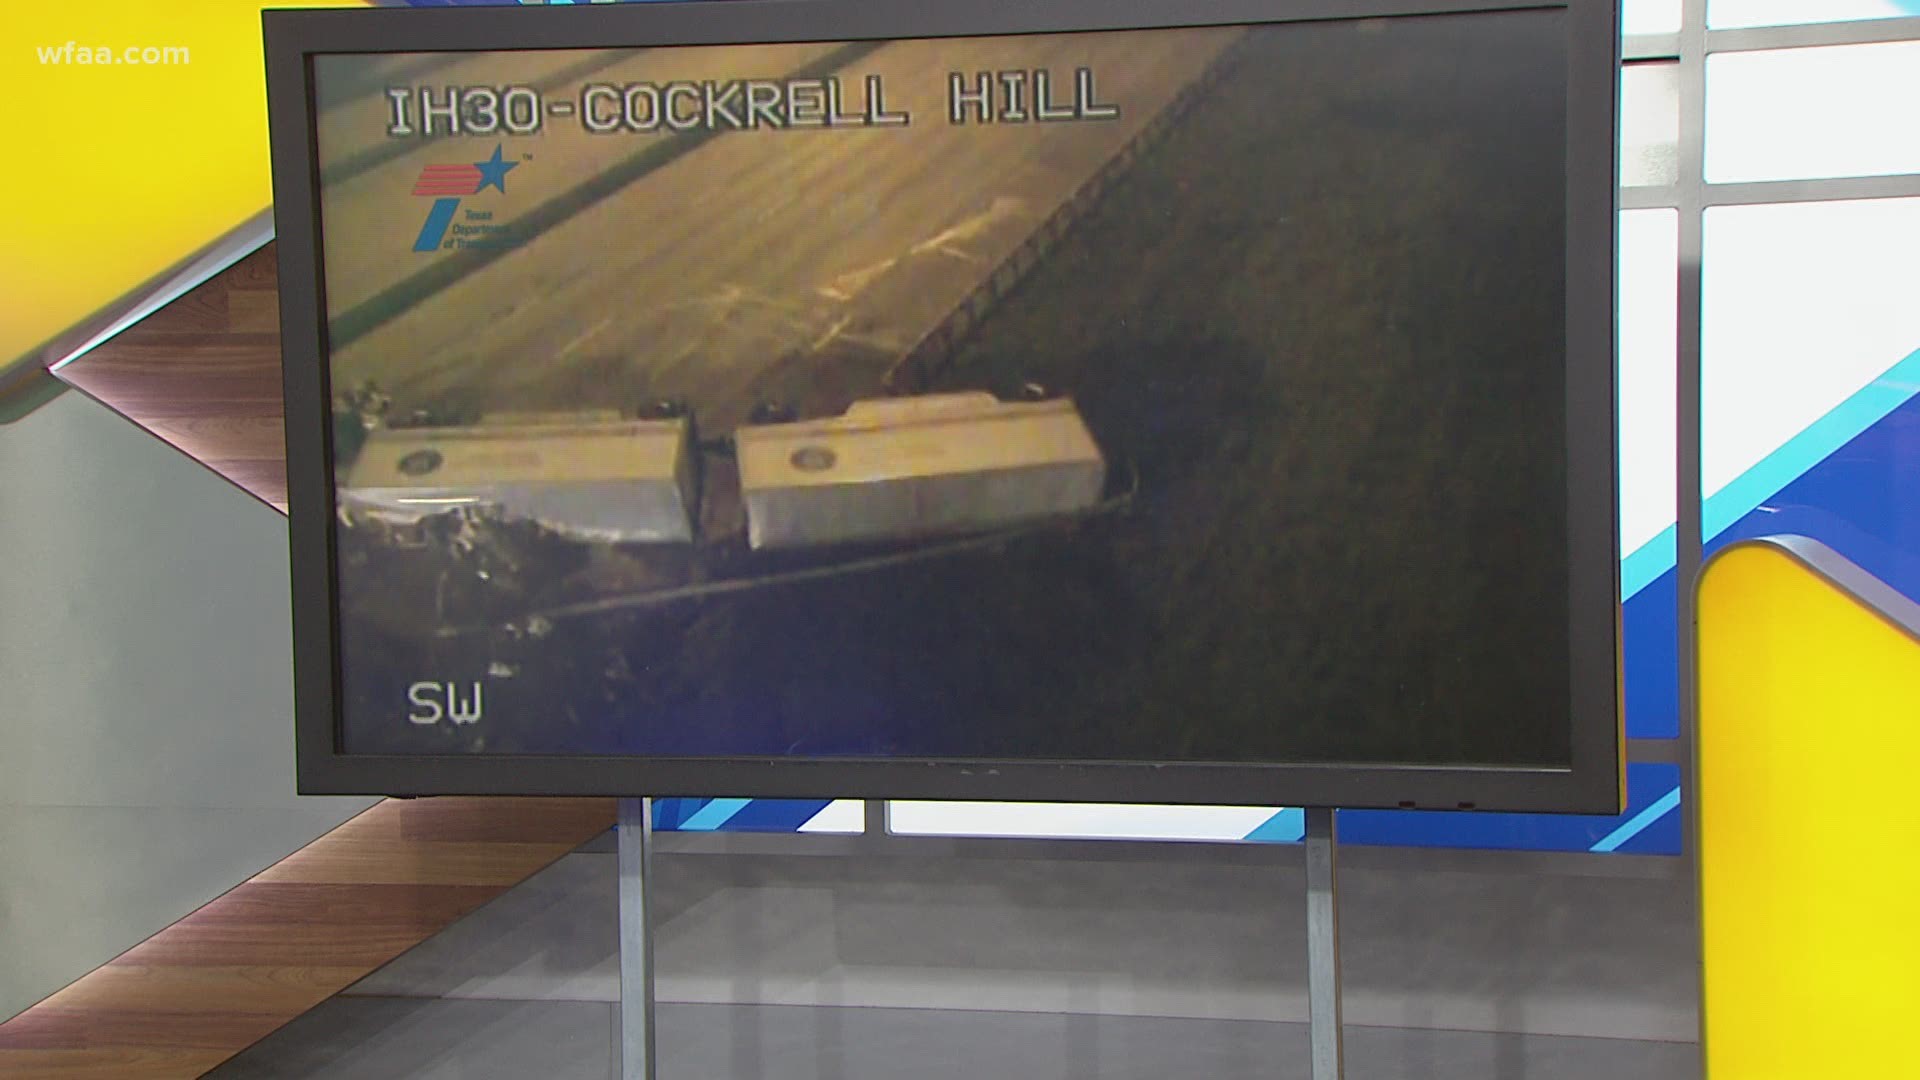 As of 6 a.m., all westbound lanes are blocked on Interstate 30 at Cockrell Hill Road due to the accident.